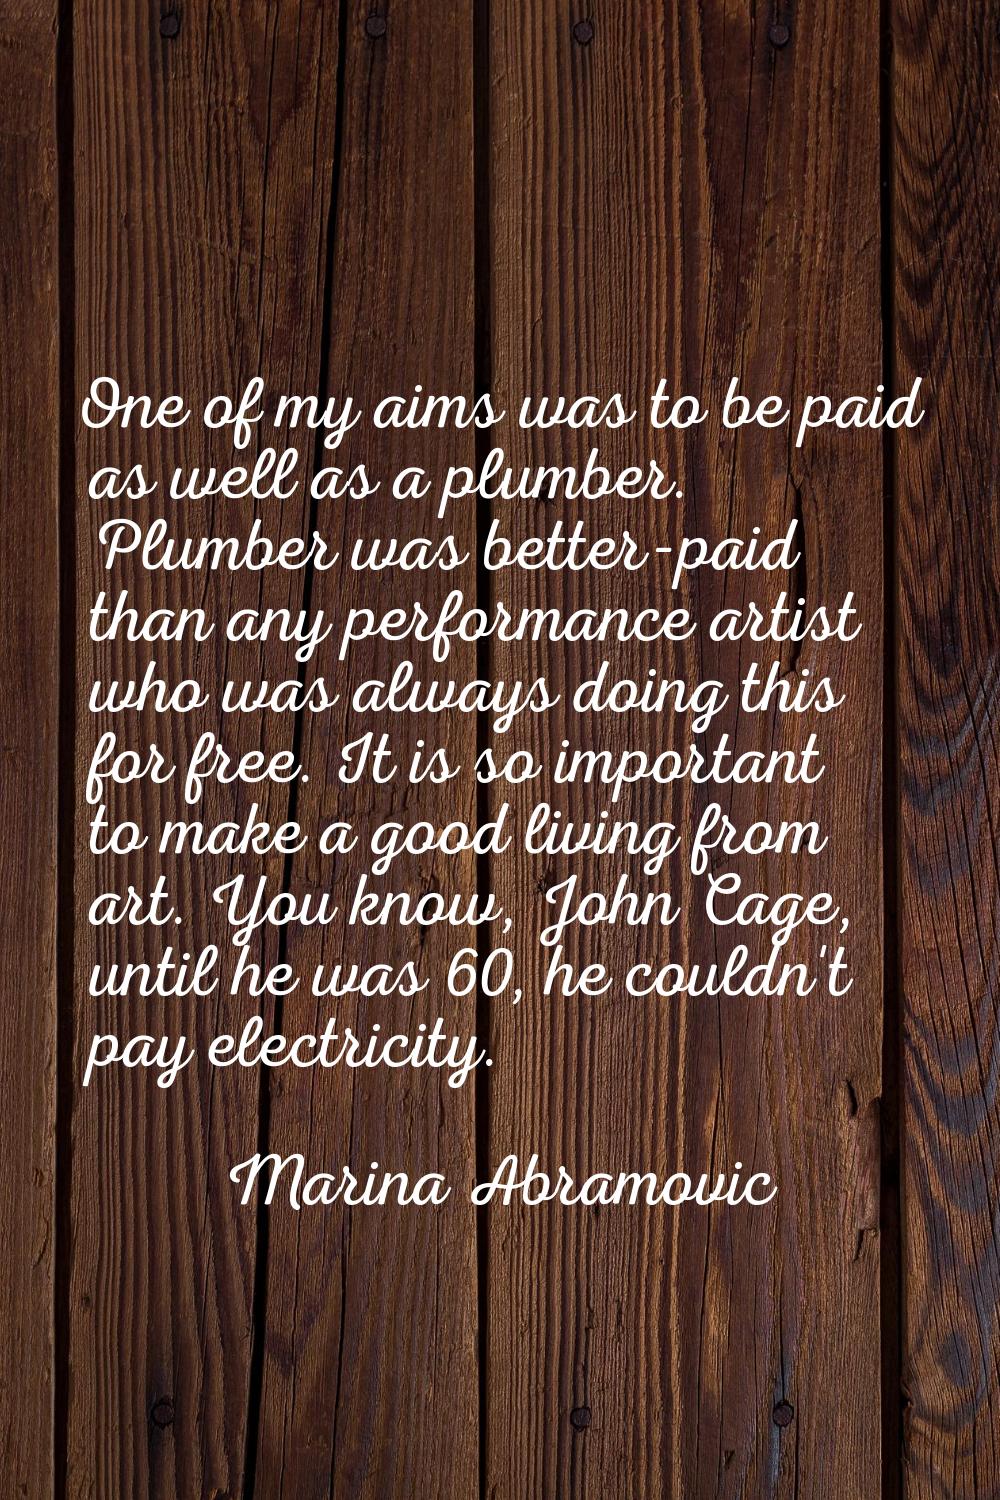 One of my aims was to be paid as well as a plumber. Plumber was better-paid than any performance ar